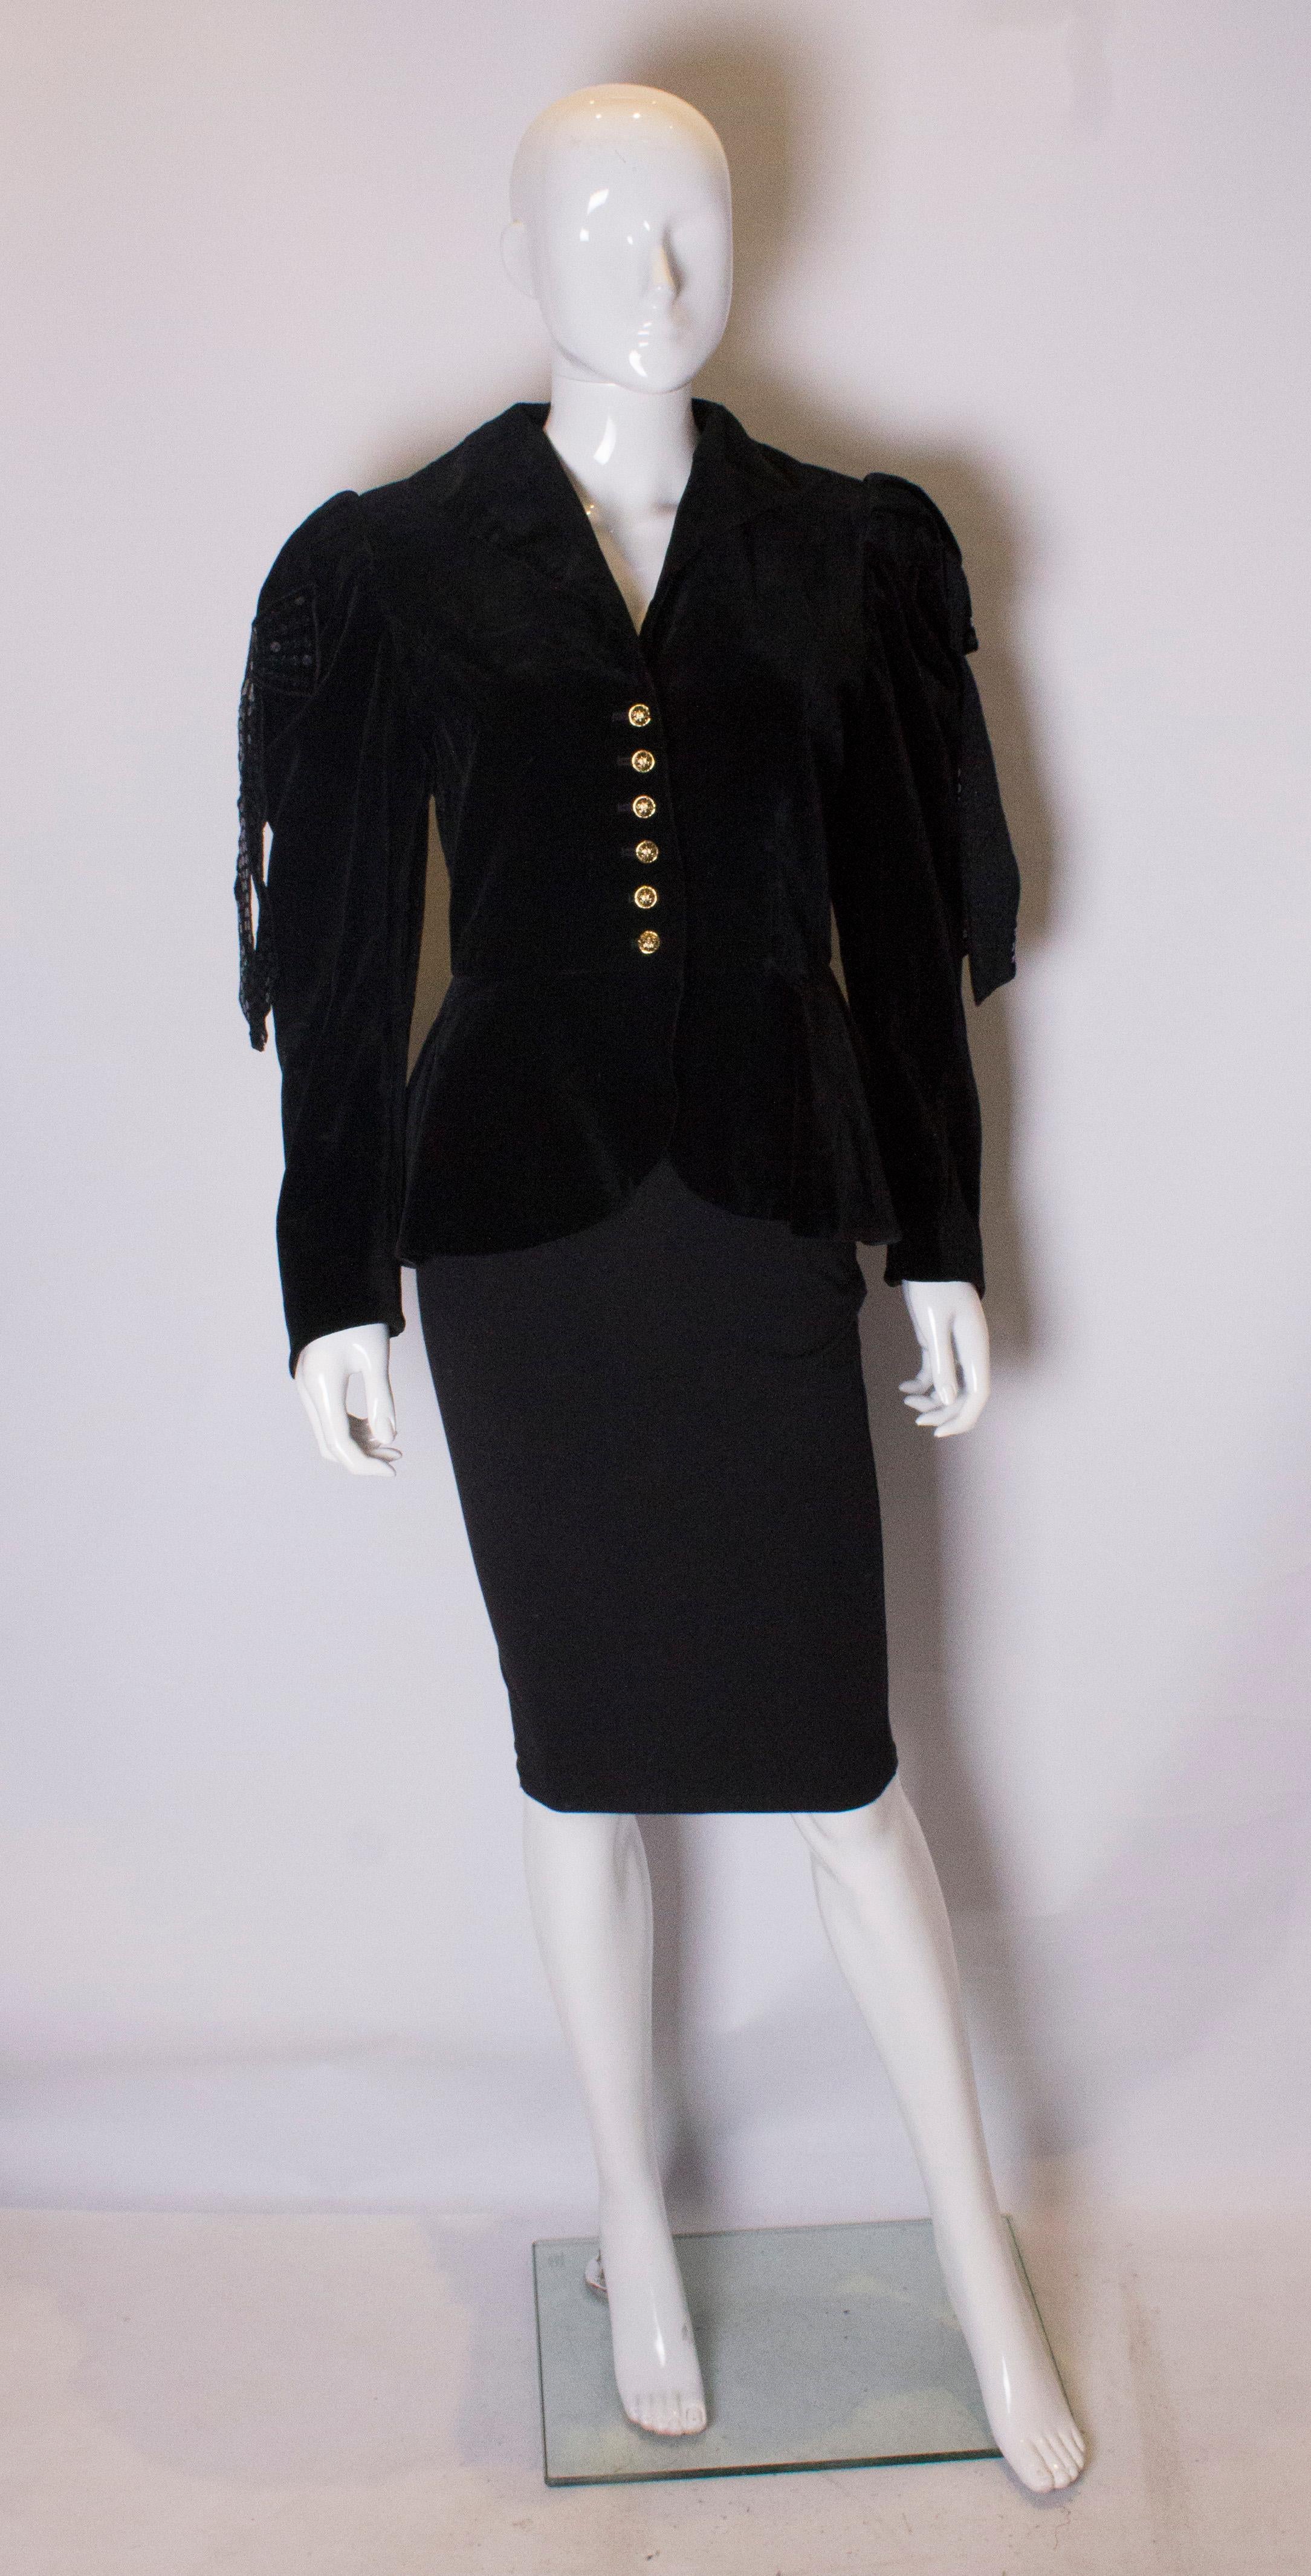 A great jacket for the party season by Helen Strasser.  The jacket is wonderfuly tailored , and has a six button front opening. It has a cut out front and sequin bows on the shoulders and back. The jacket is fully lined.